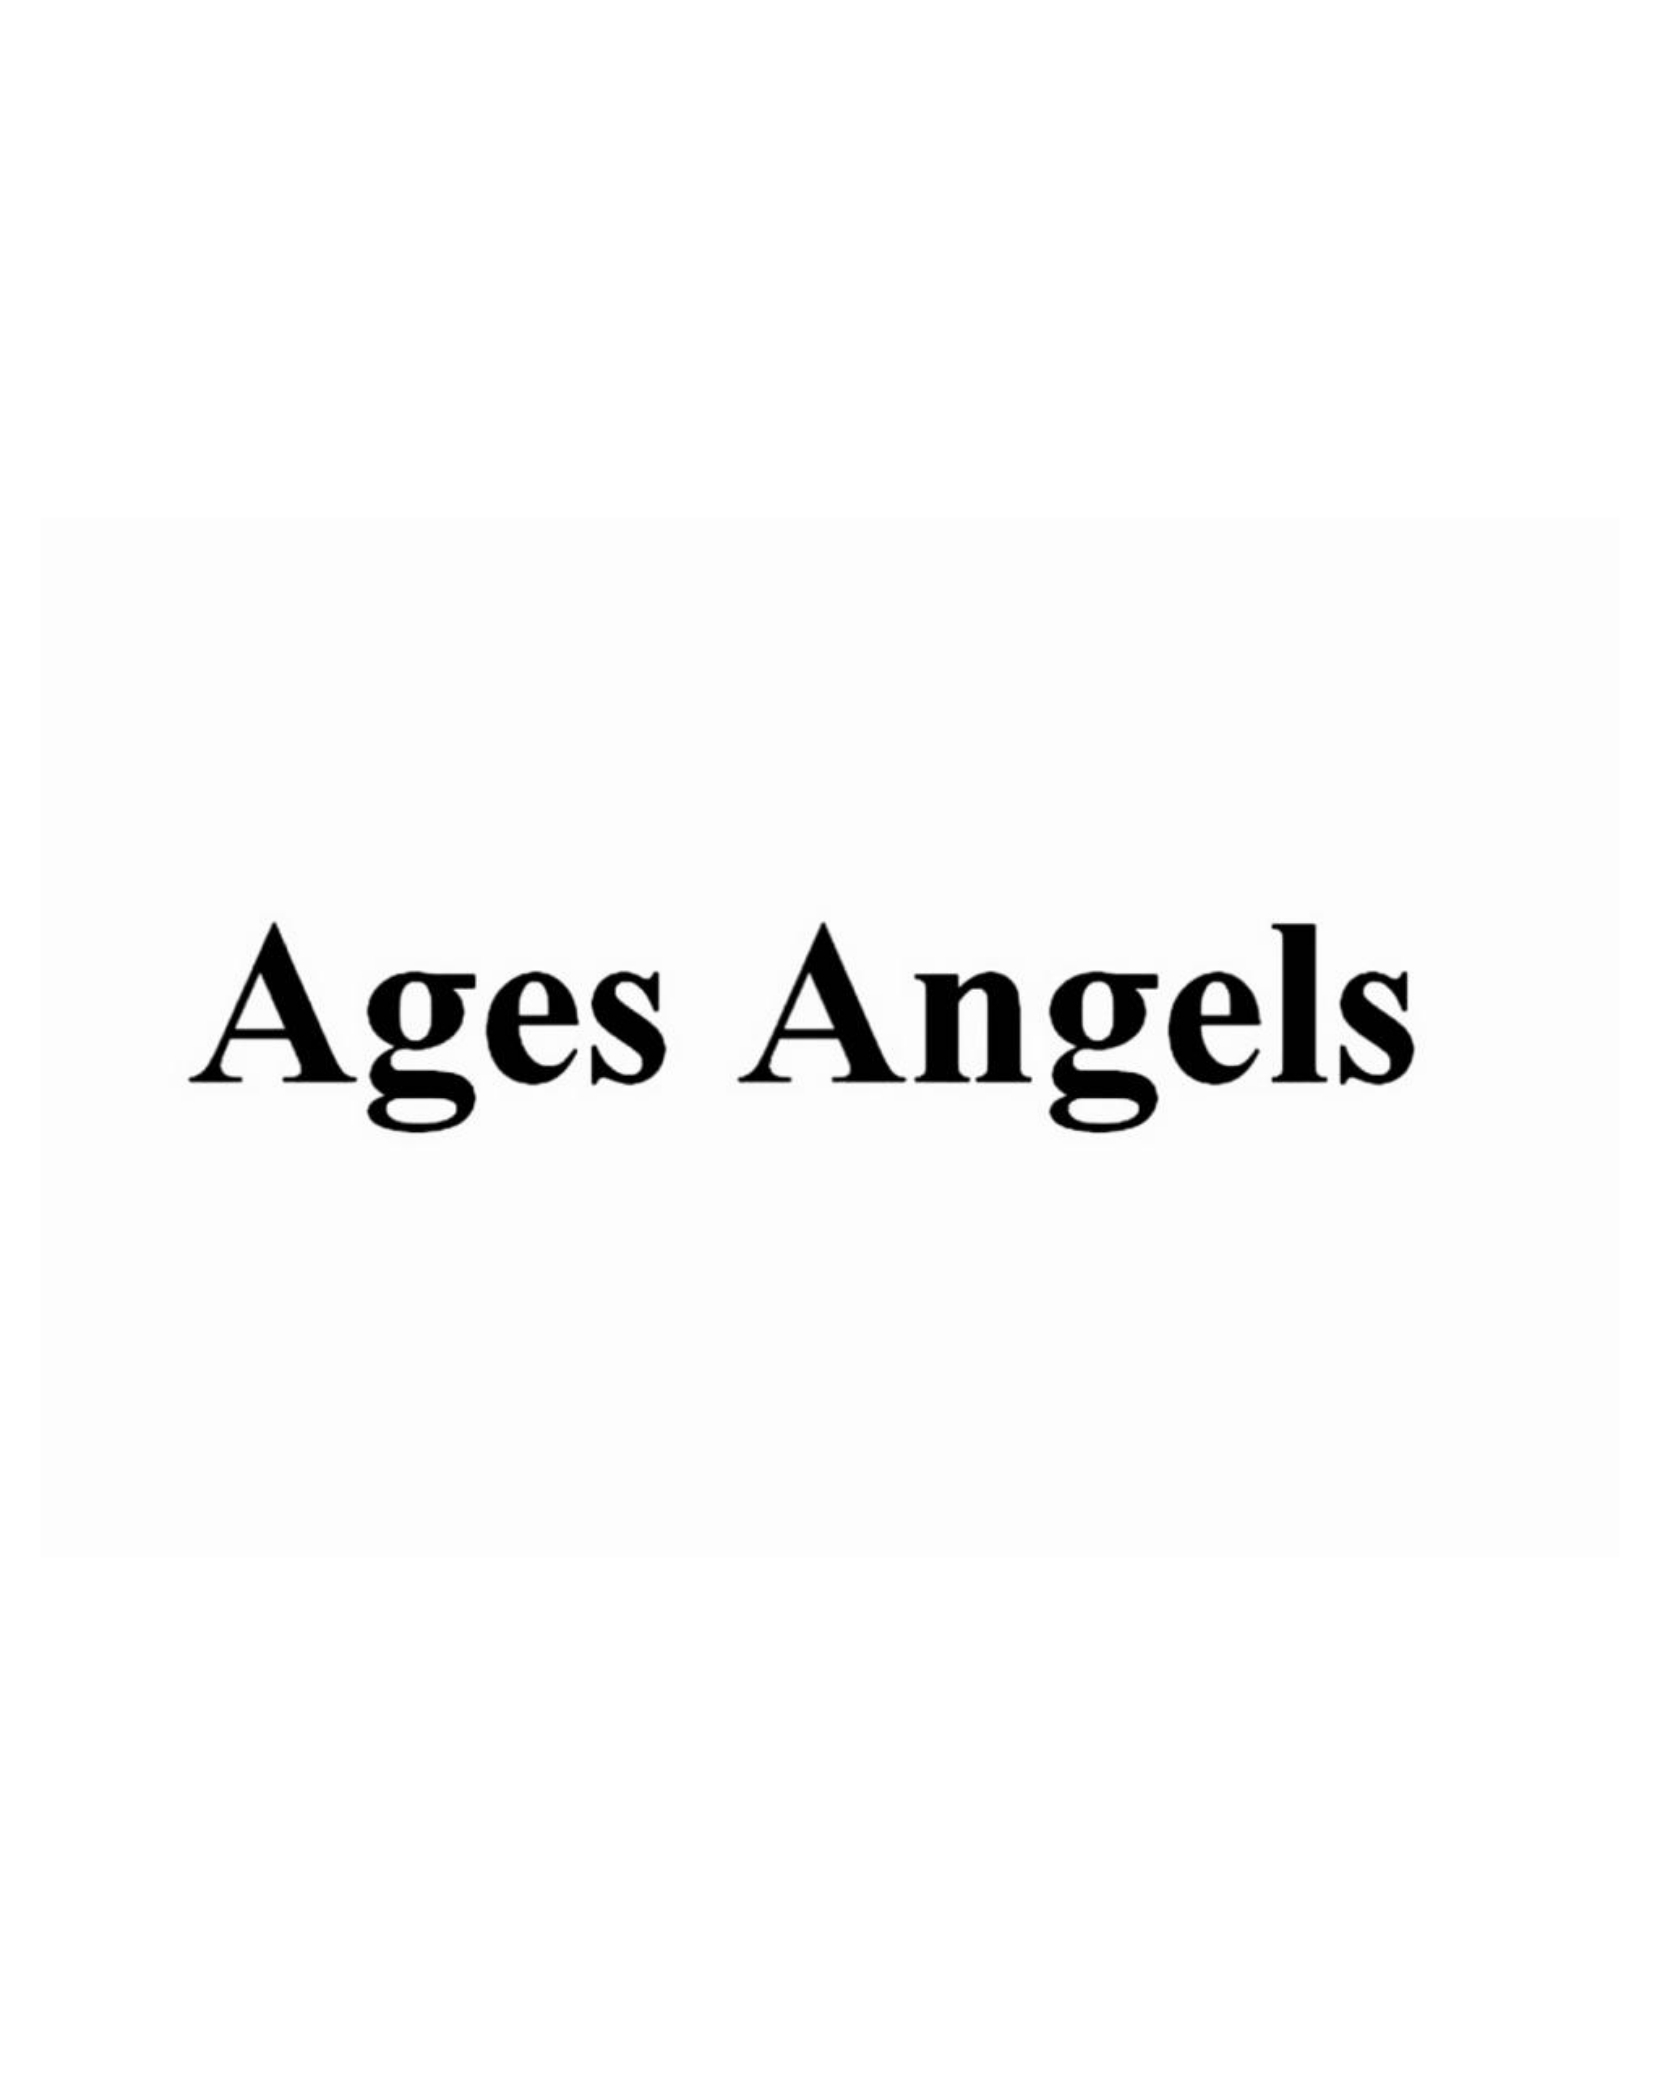 AGES ANGELS